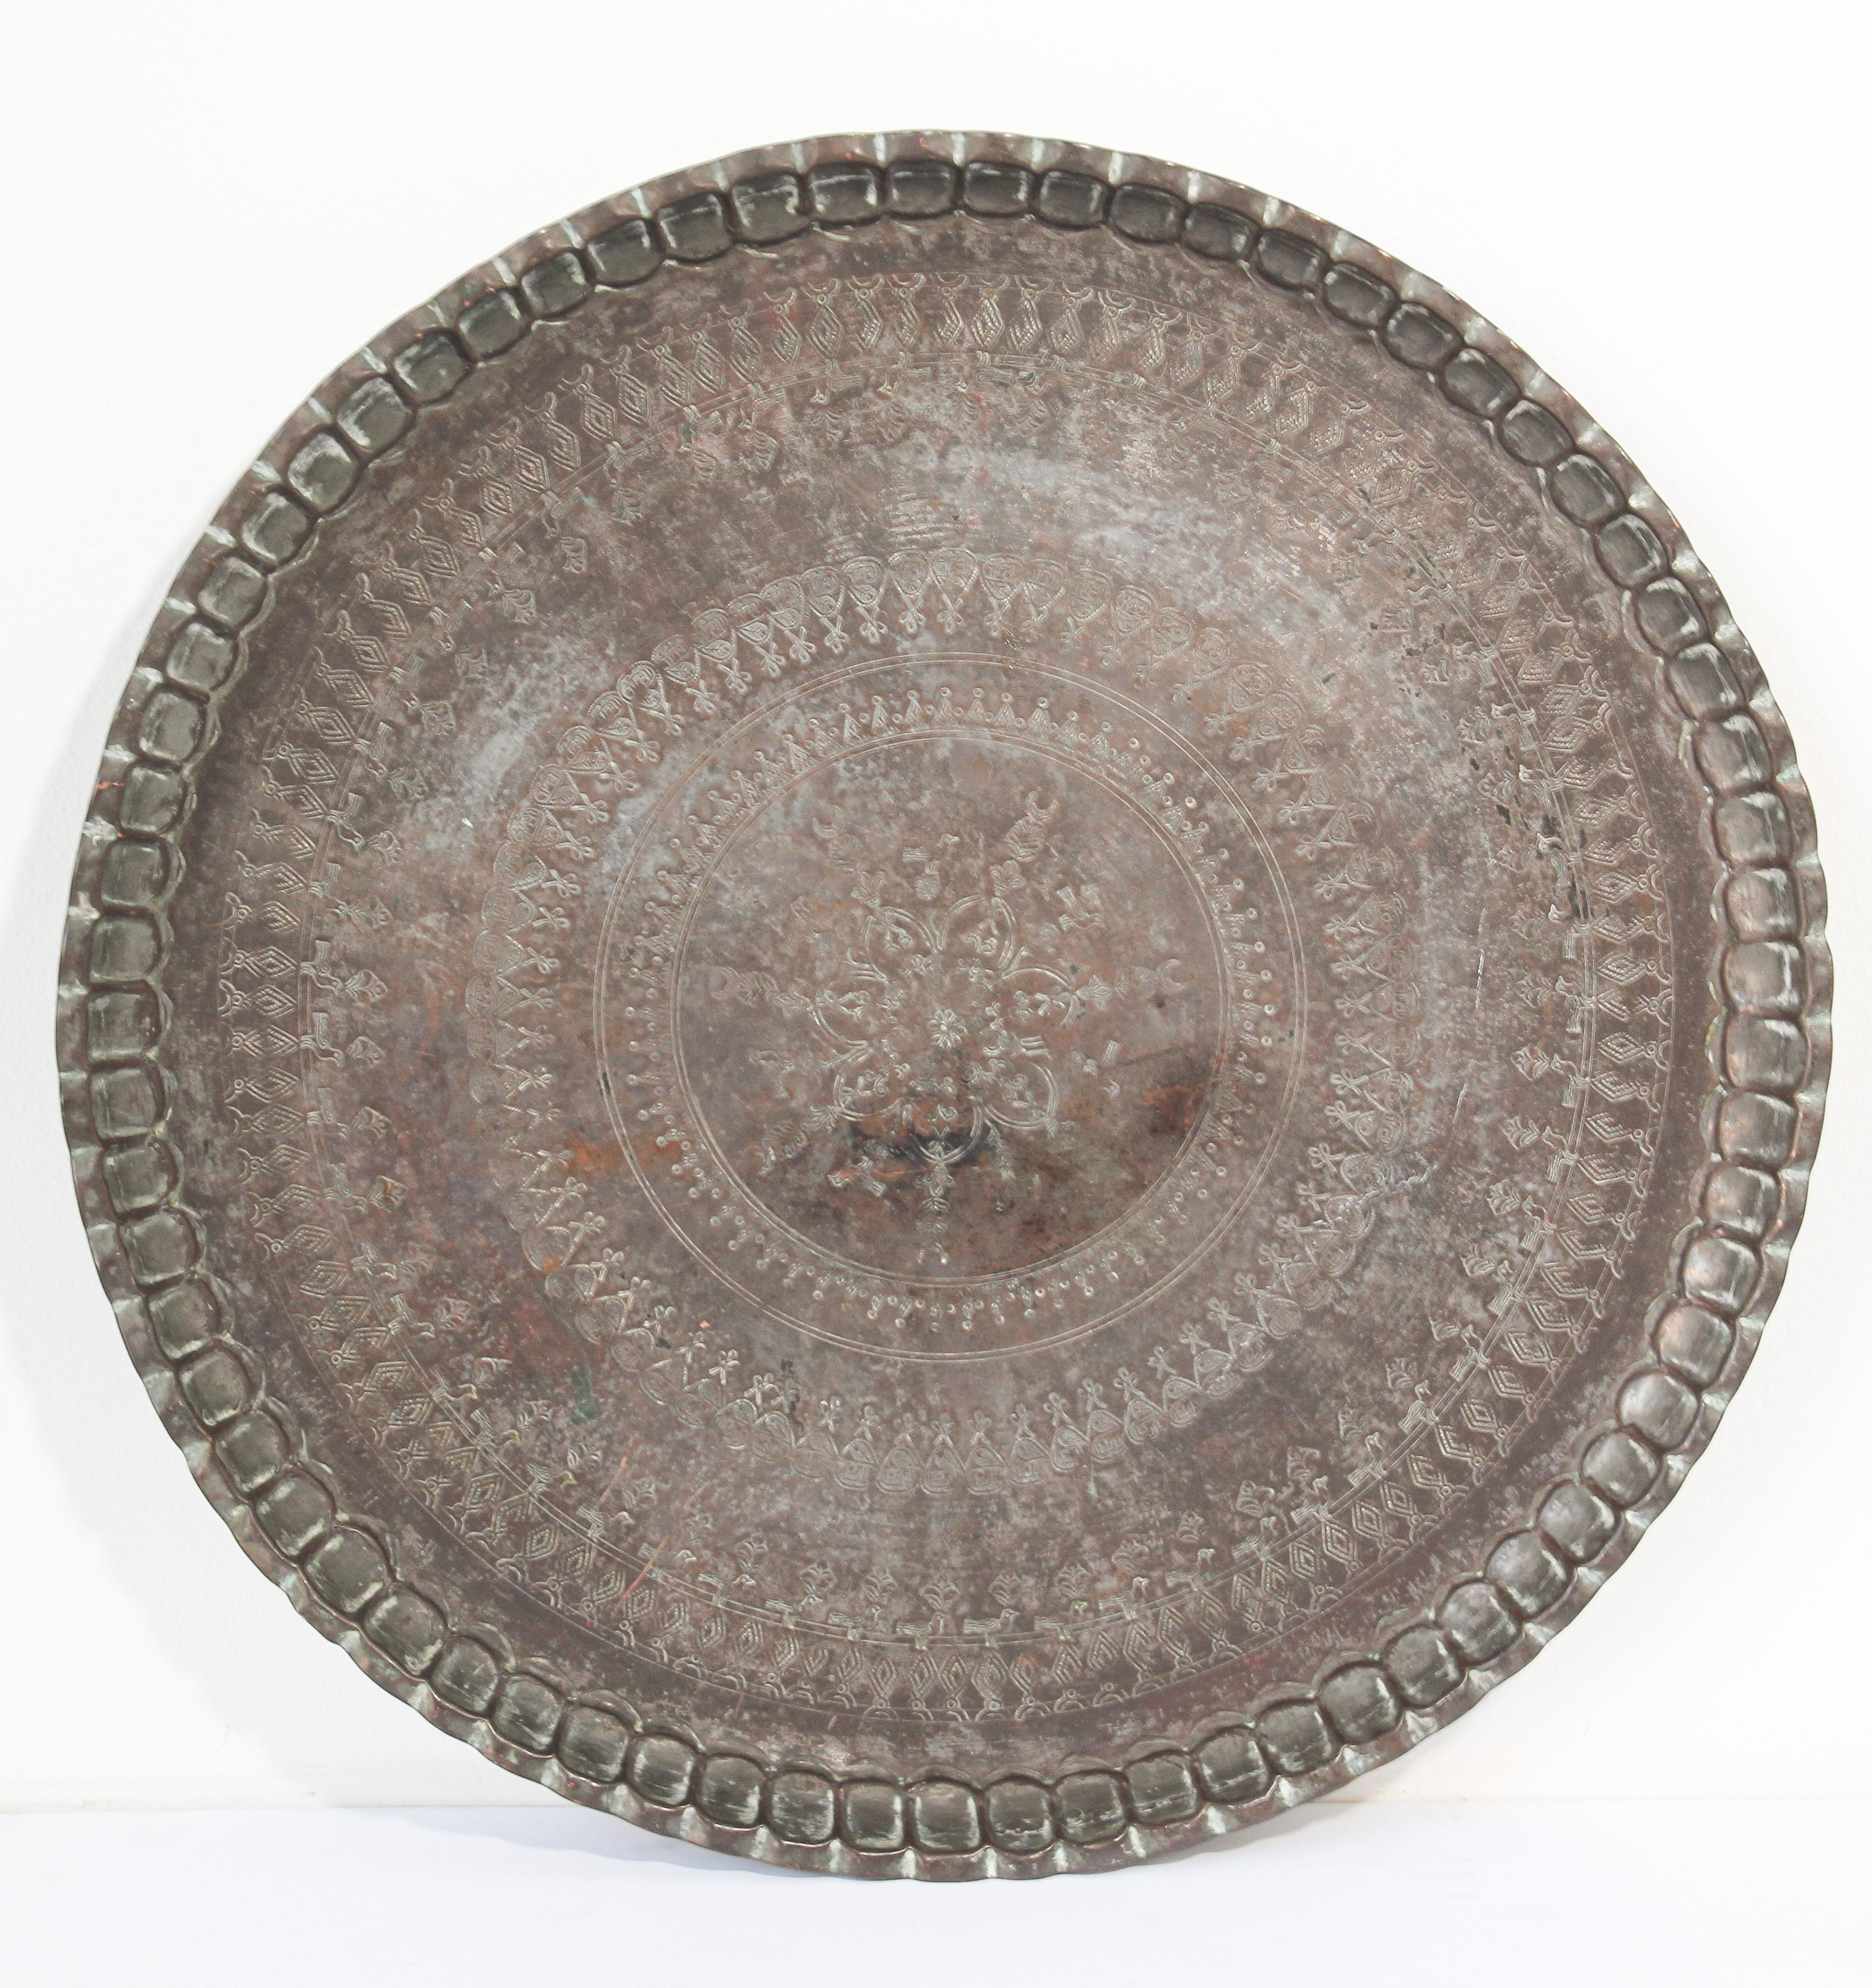 A large-scale 19th century Moorish style charger. 
With deeply scalloped hand-hammered edge, with intricate incised geometric decoration, floral arabesques spiraling from the centre,
Antique Turkish Persian Mameluke style tinned copper circular